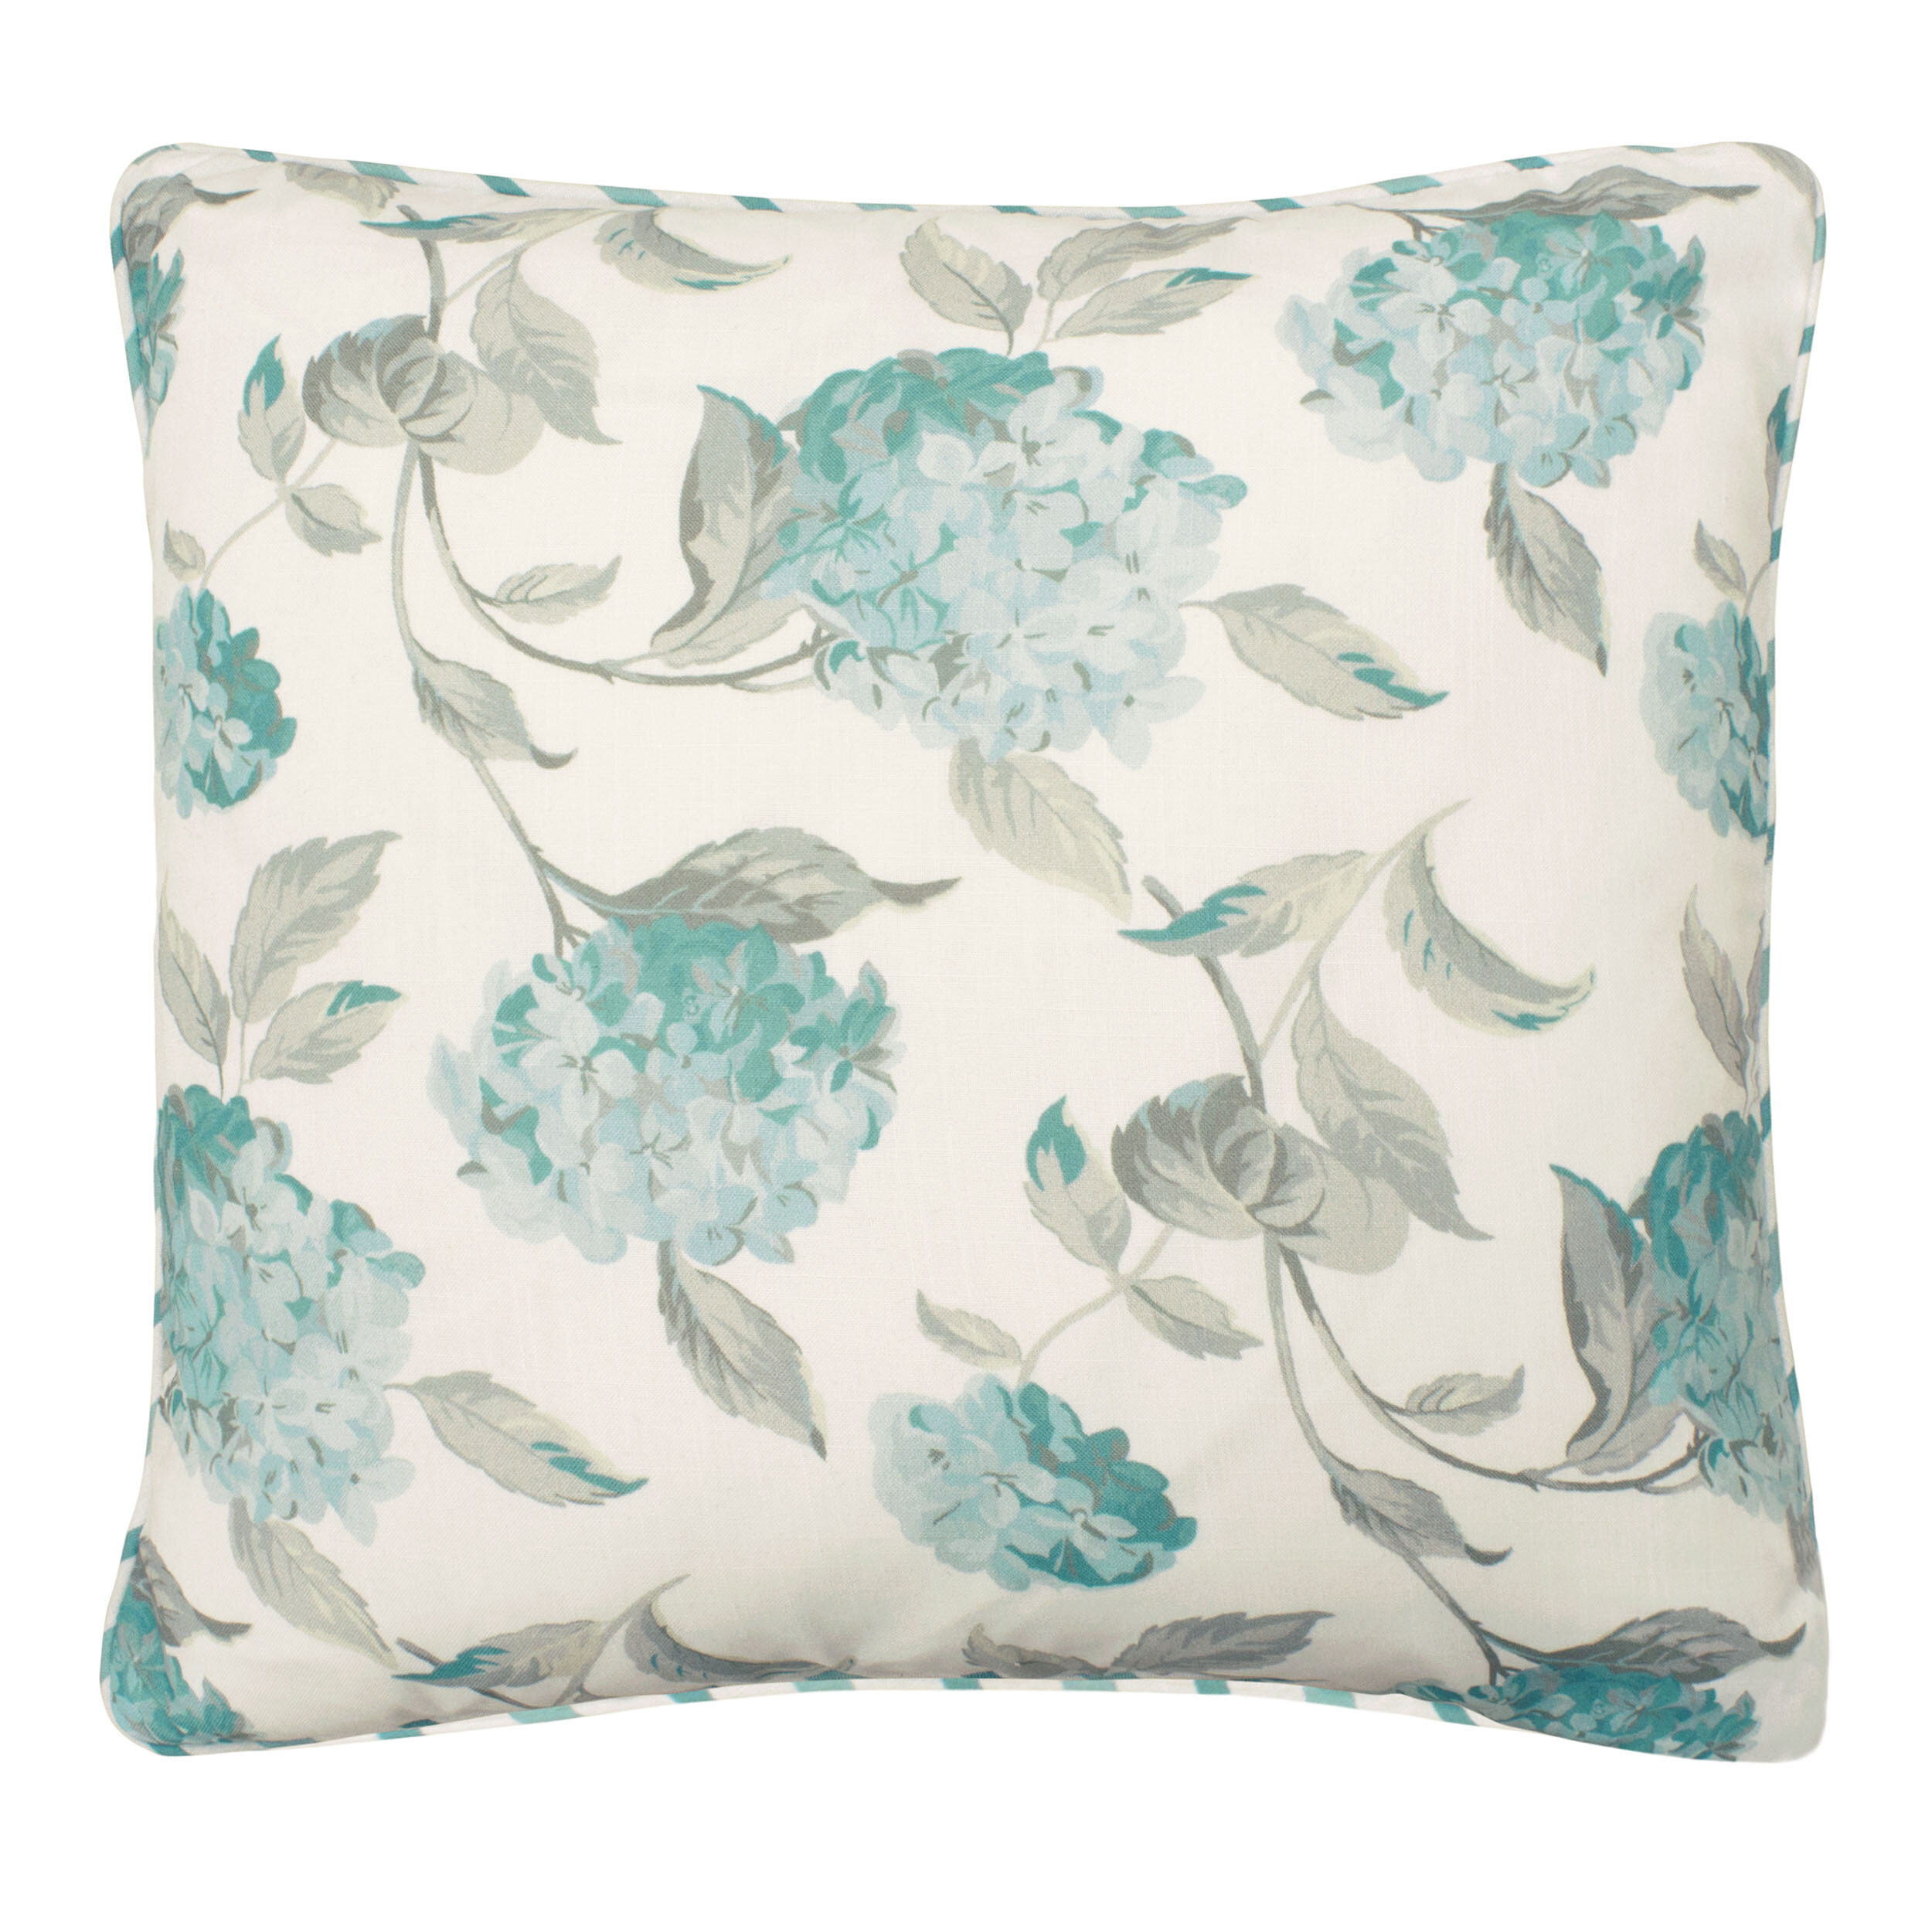 Large 25.5 x 18 Society6 Summer Lemon Floral by Crystal W Design on Rectangular Pillow 